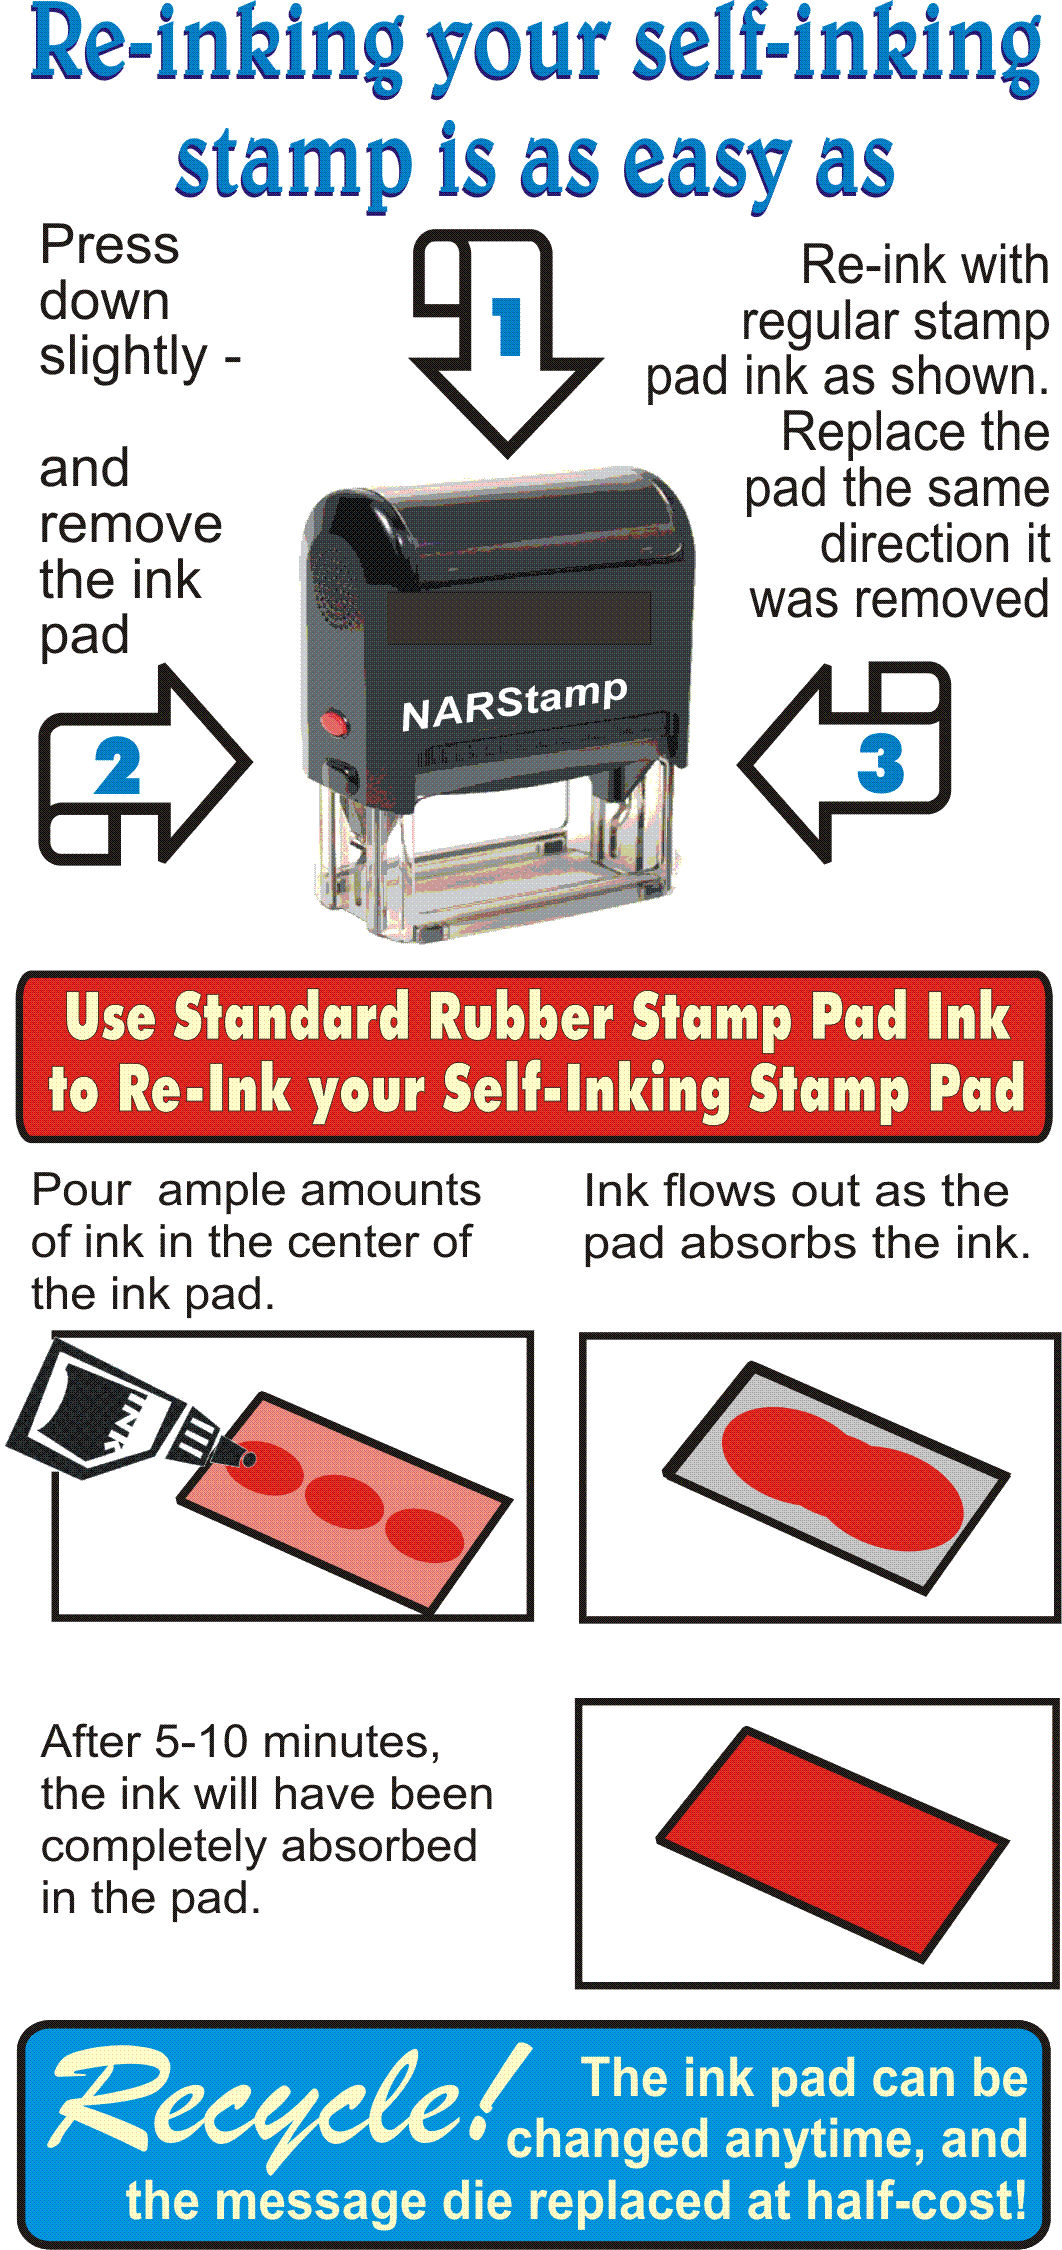 Re-inking instruction for self-inking stamp pads